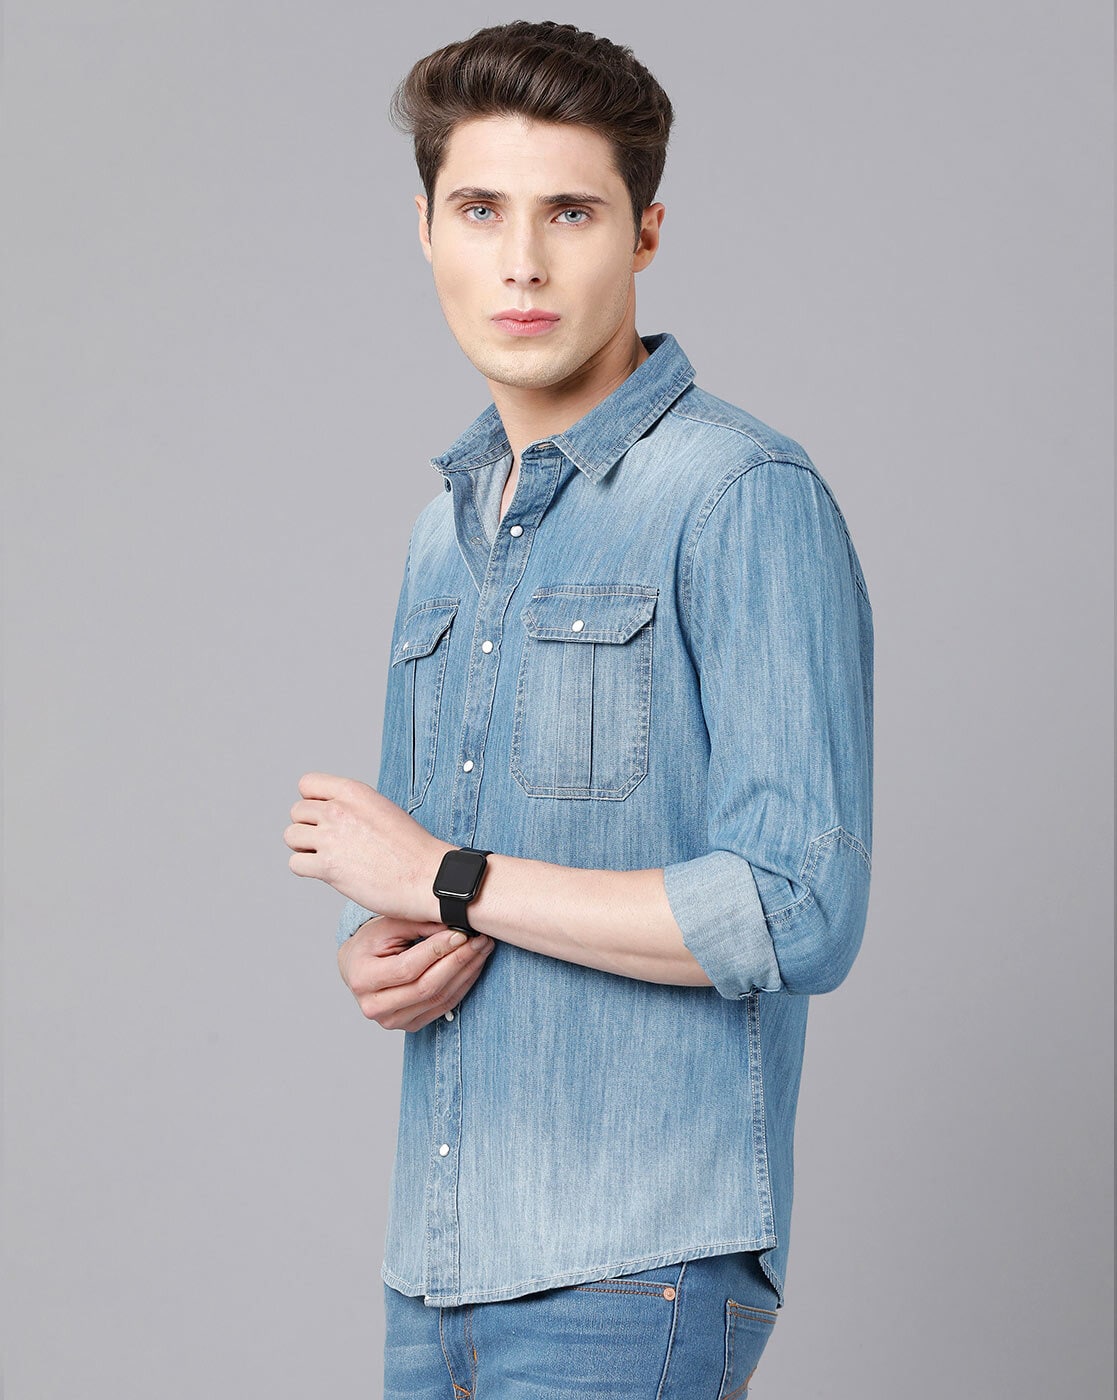 Buy Blue Shirts for Men by Prototype Online